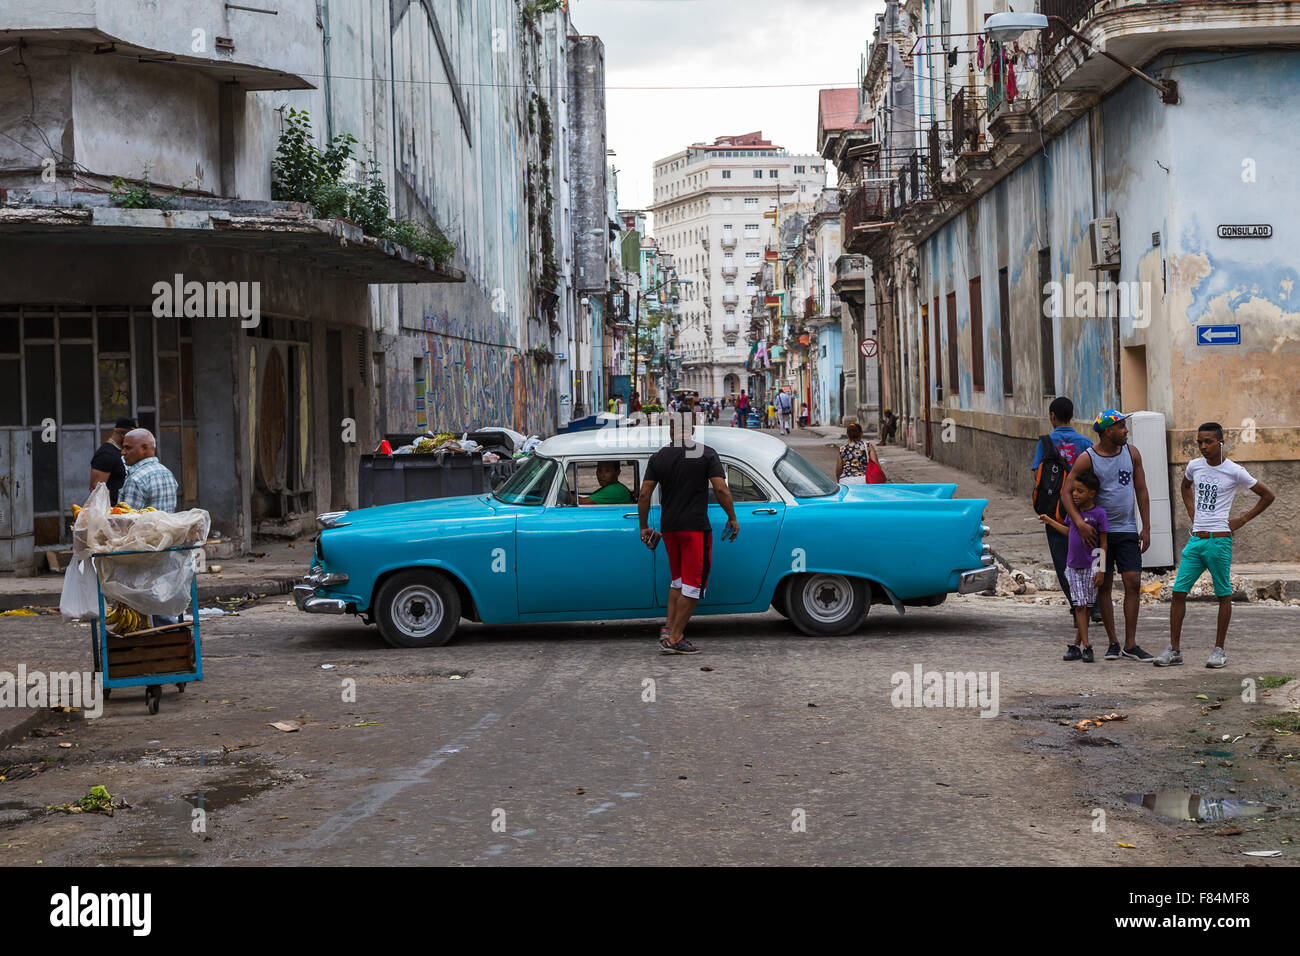 Looking over Calle Consulado in Cento Havana, Cuba as a classical car passes some locals on the streets. Stock Photo